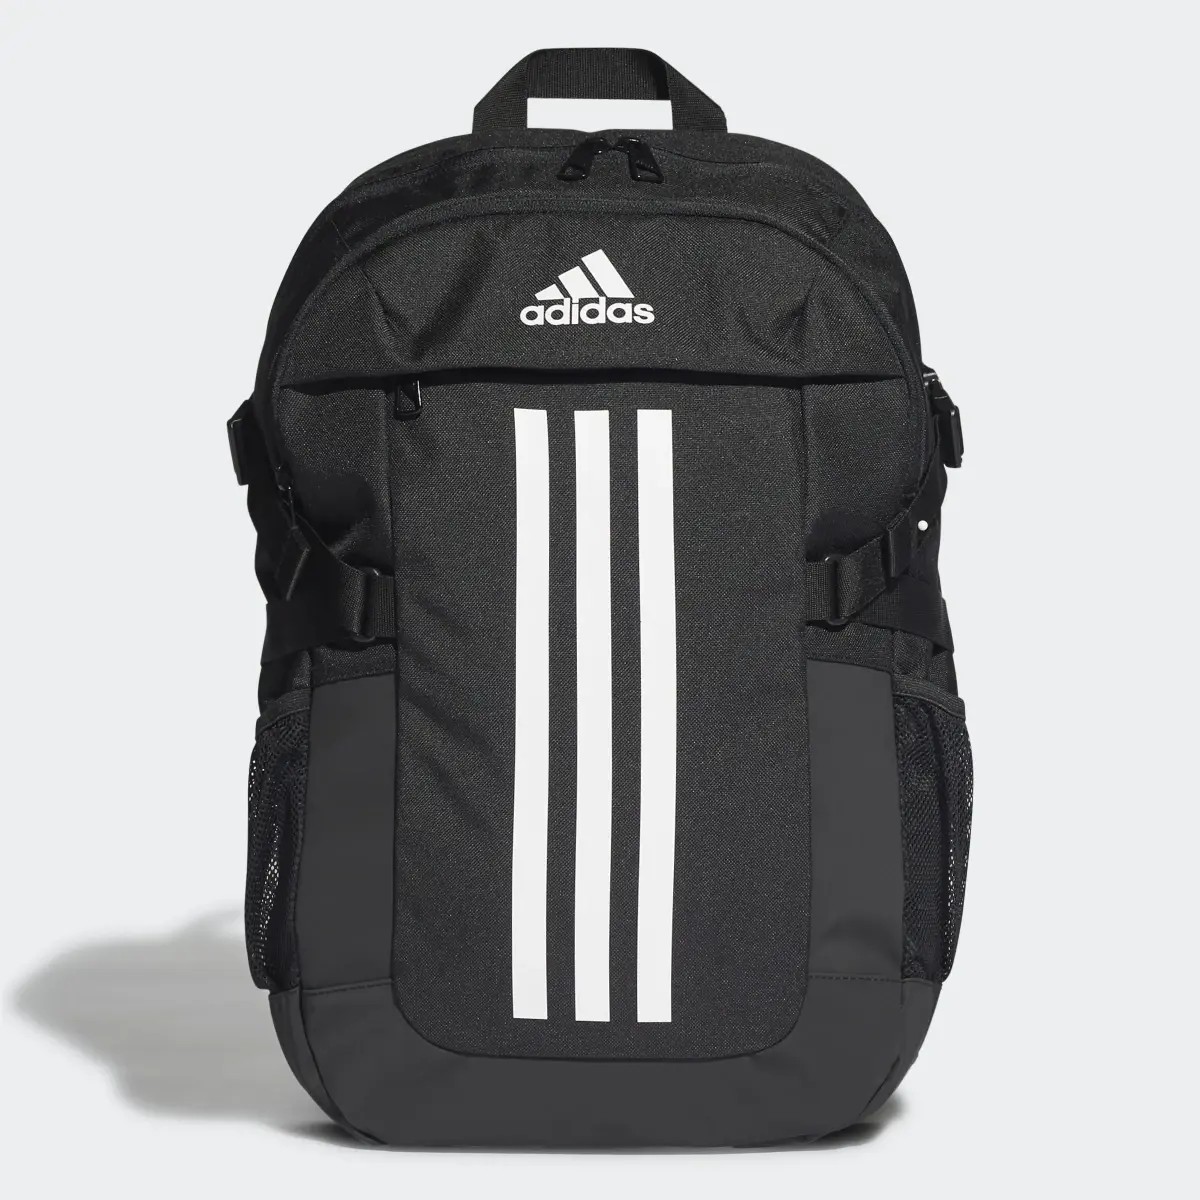 Adidas Power Backpack. 1